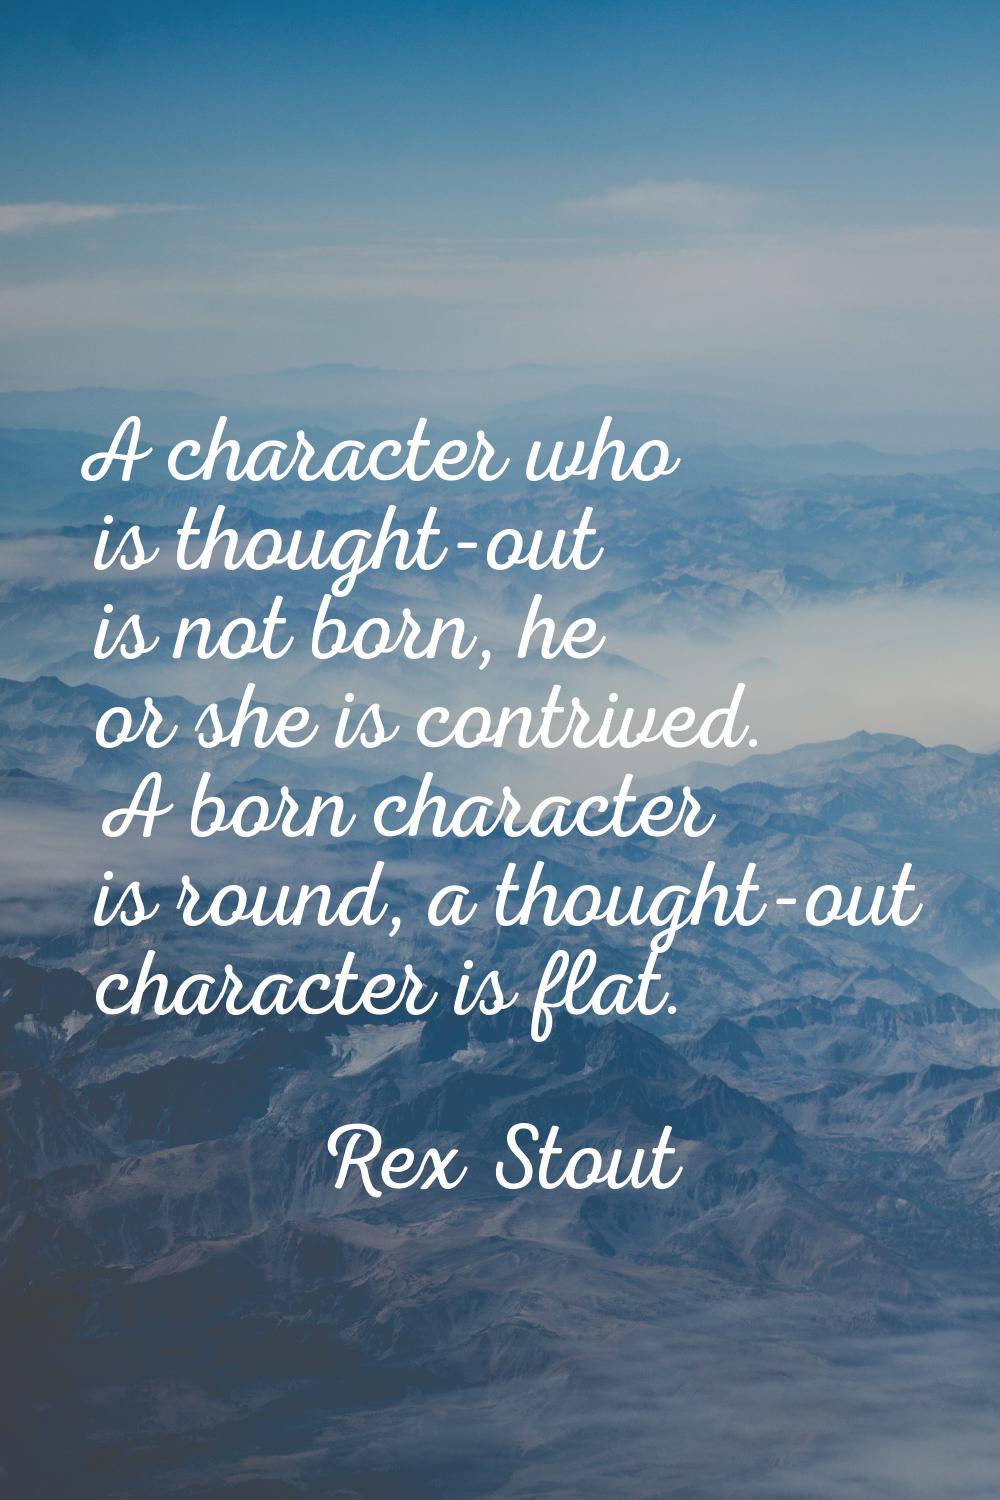 A character who is thought-out is not born, he or she is contrived. A born character is round, a th